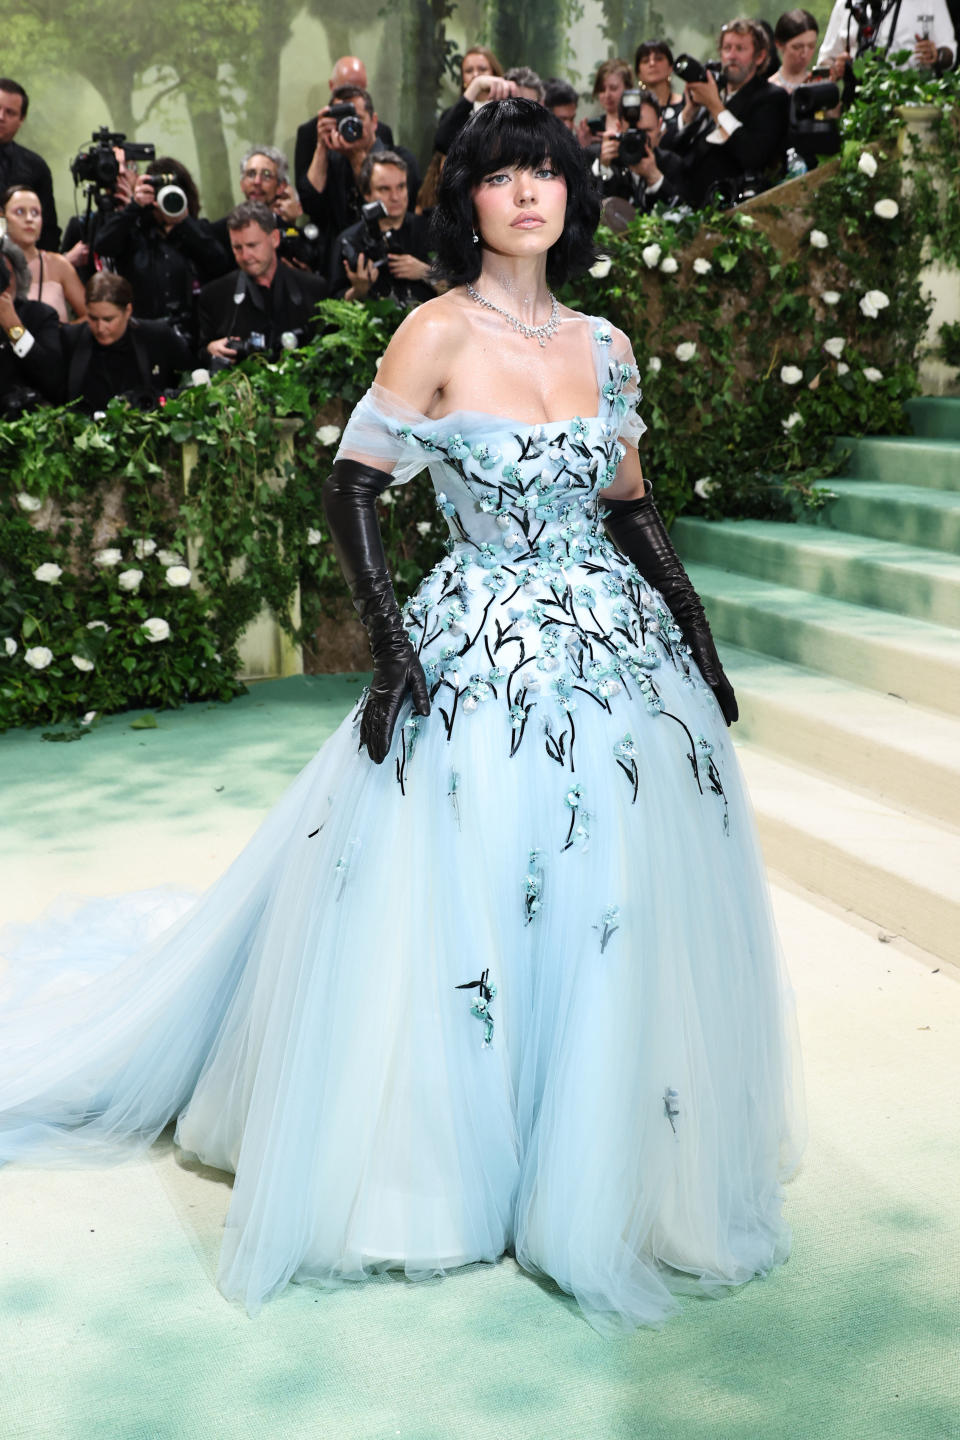 Sydney Sweeney in baby blue floral gown by Miu Miu. (Image via Getty Images)